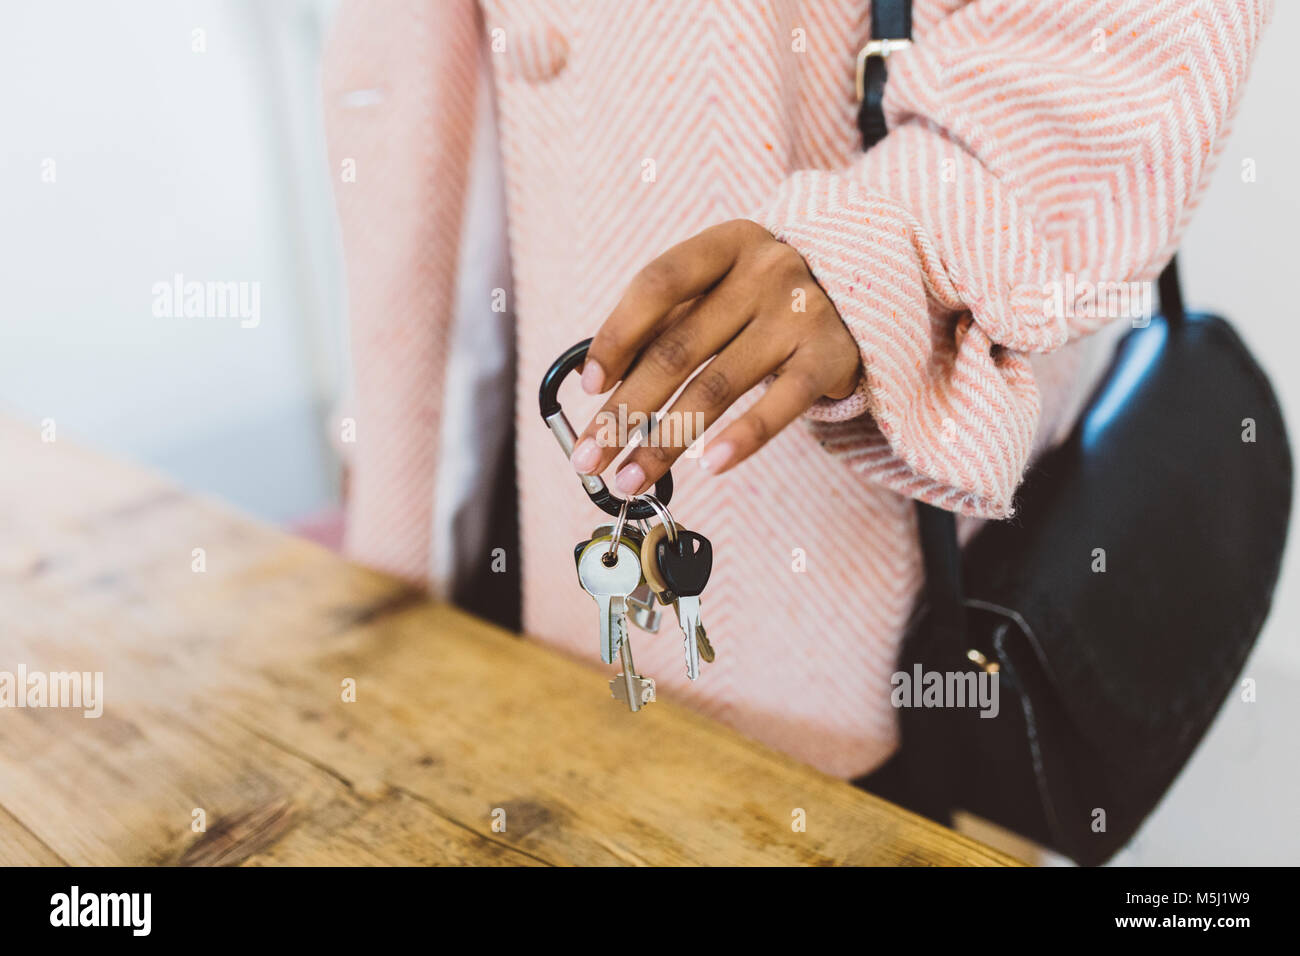 Woman coming home, putting keys on table Stock Photo